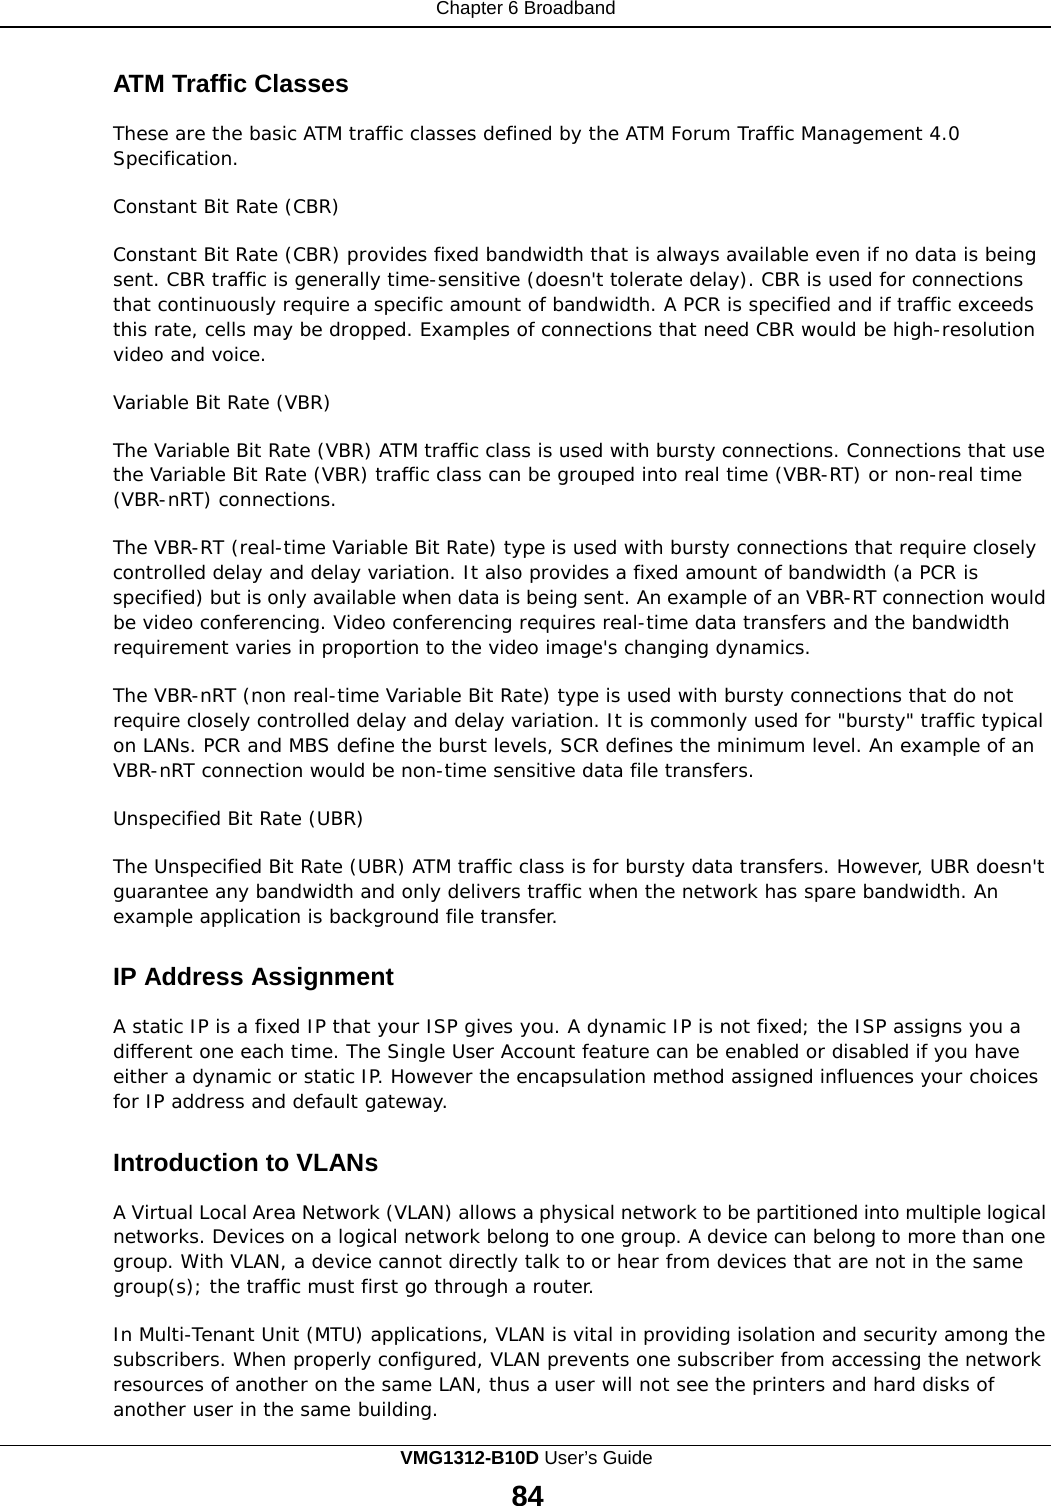 Chapter 6 Broadband    ATM Traffic Classes  These are the basic ATM traffic classes defined by the ATM Forum Traffic Management 4.0 Specification.  Constant Bit Rate (CBR)  Constant Bit Rate (CBR) provides fixed bandwidth that is always available even if no data is being sent. CBR traffic is generally time-sensitive (doesn&apos;t tolerate delay). CBR is used for connections that continuously require a specific amount of bandwidth. A PCR is specified and if traffic exceeds this rate, cells may be dropped. Examples of connections that need CBR would be high-resolution video and voice.  Variable Bit Rate (VBR)  The Variable Bit Rate (VBR) ATM traffic class is used with bursty connections. Connections that use the Variable Bit Rate (VBR) traffic class can be grouped into real time (VBR-RT) or non-real time (VBR-nRT) connections.  The VBR-RT (real-time Variable Bit Rate) type is used with bursty connections that require closely controlled delay and delay variation. It also provides a fixed amount of bandwidth (a PCR is specified) but is only available when data is being sent. An example of an VBR-RT connection would be video conferencing. Video conferencing requires real-time data transfers and the bandwidth requirement varies in proportion to the video image&apos;s changing dynamics.  The VBR-nRT (non real-time Variable Bit Rate) type is used with bursty connections that do not require closely controlled delay and delay variation. It is commonly used for &quot;bursty&quot; traffic typical on LANs. PCR and MBS define the burst levels, SCR defines the minimum level. An example of an VBR-nRT connection would be non-time sensitive data file transfers.  Unspecified Bit Rate (UBR)  The Unspecified Bit Rate (UBR) ATM traffic class is for bursty data transfers. However, UBR doesn&apos;t guarantee any bandwidth and only delivers traffic when the network has spare bandwidth. An example application is background file transfer.   IP Address Assignment  A static IP is a fixed IP that your ISP gives you. A dynamic IP is not fixed; the ISP assigns you a different one each time. The Single User Account feature can be enabled or disabled if you have either a dynamic or static IP. However the encapsulation method assigned influences your choices for IP address and default gateway.   Introduction to VLANs  A Virtual Local Area Network (VLAN) allows a physical network to be partitioned into multiple logical networks. Devices on a logical network belong to one group. A device can belong to more than one group. With VLAN, a device cannot directly talk to or hear from devices that are not in the same group(s); the traffic must first go through a router.  In Multi-Tenant Unit (MTU) applications, VLAN is vital in providing isolation and security among the subscribers. When properly configured, VLAN prevents one subscriber from accessing the network resources of another on the same LAN, thus a user will not see the printers and hard disks of another user in the same building. VMG1312-B10D User’s Guide 84  